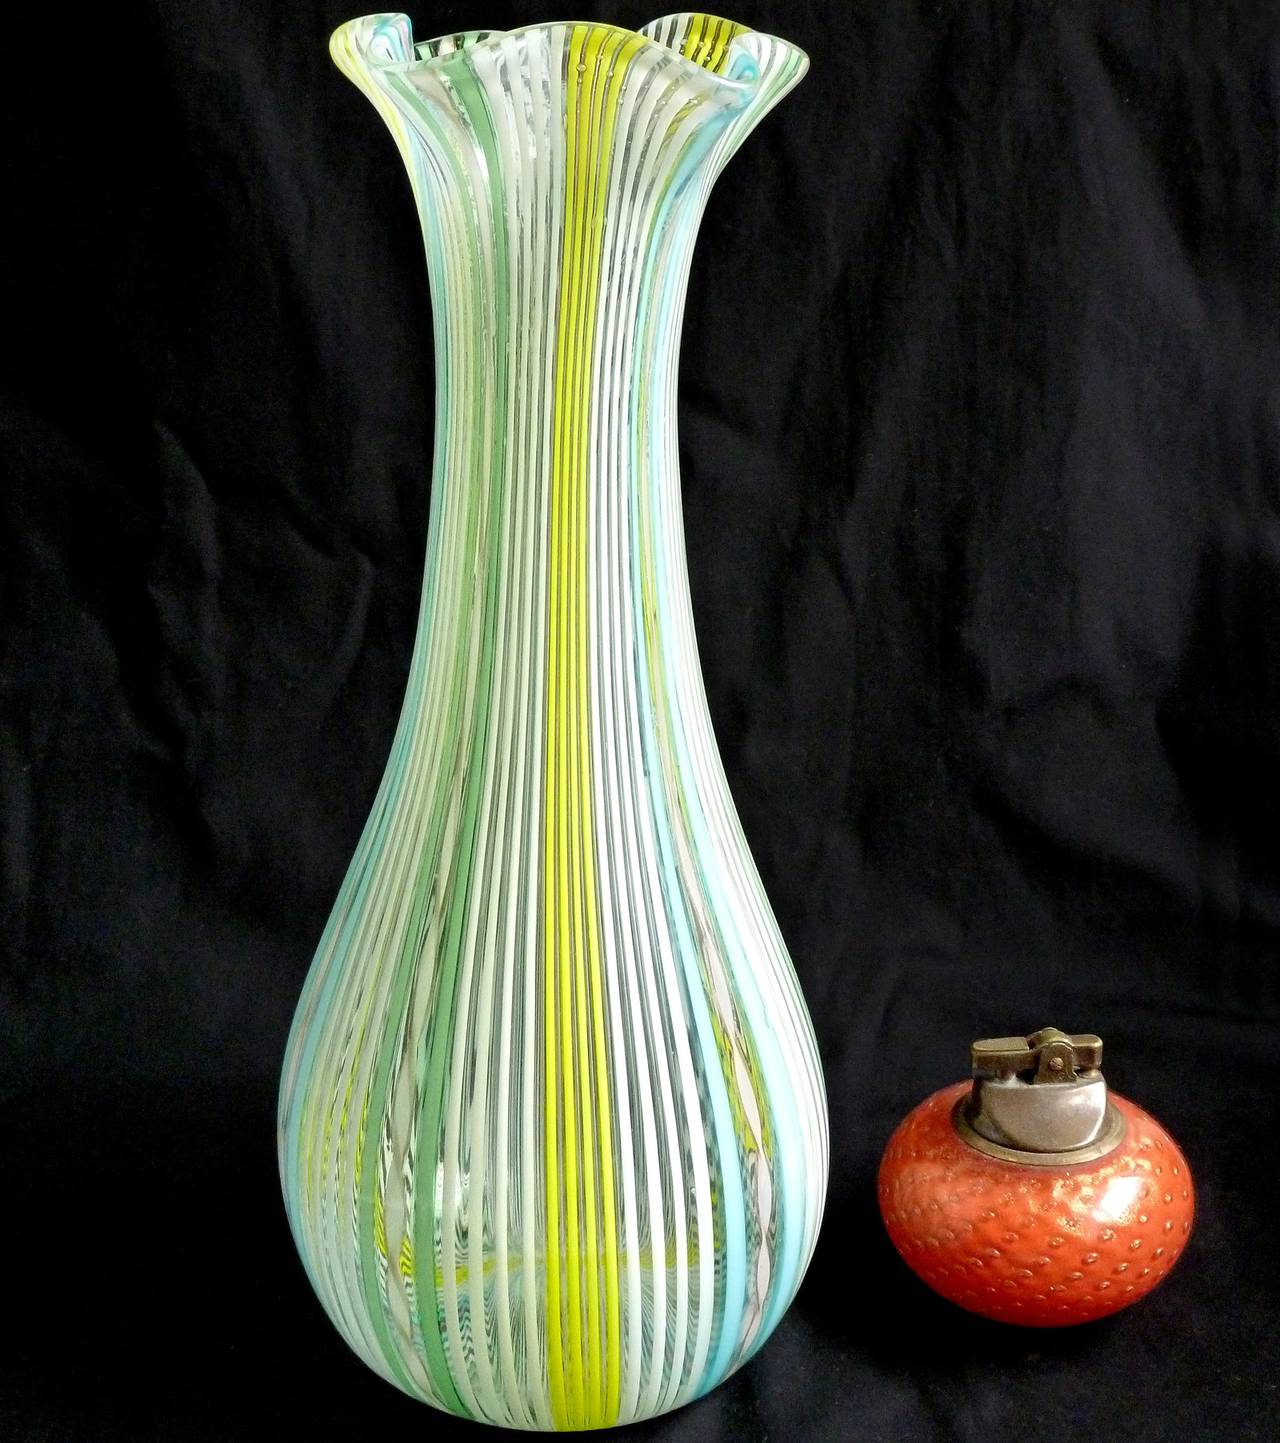 FREE Shipping Worldwide! See details below description.

Large and Beautiful Murano Hand Blown Filigrana and Zanfirico Ribbons Art Glass Flower Vase. Attributed to designer Dino Martens for Aureliano Toso. The rim is crimped to form a flower